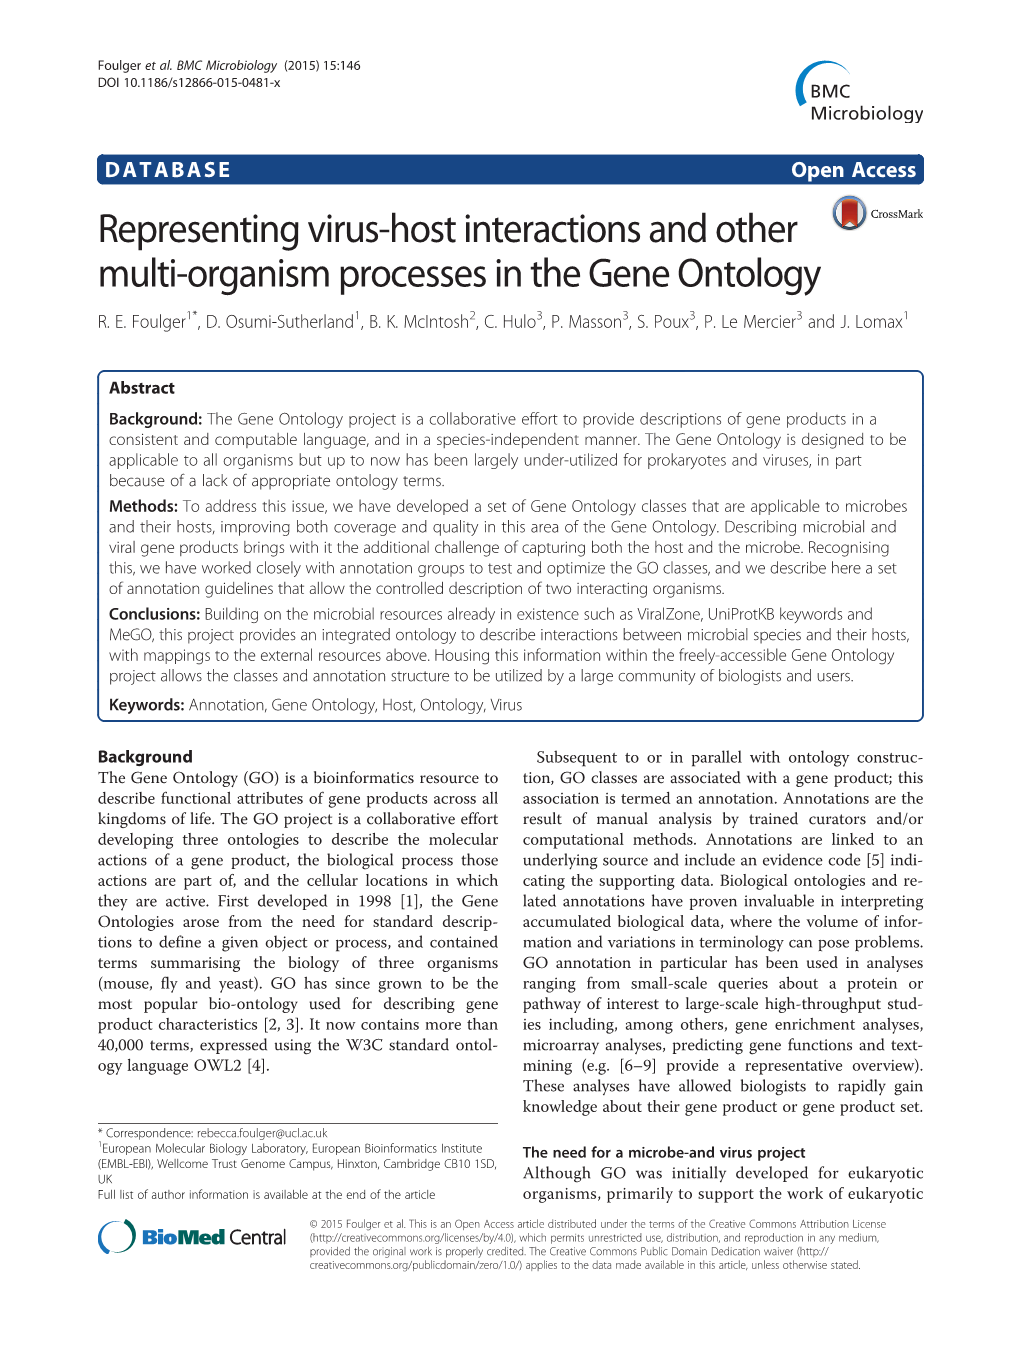 Representing Virus-Host Interactions and Other Multi-Organism Processes in the Gene Ontology R